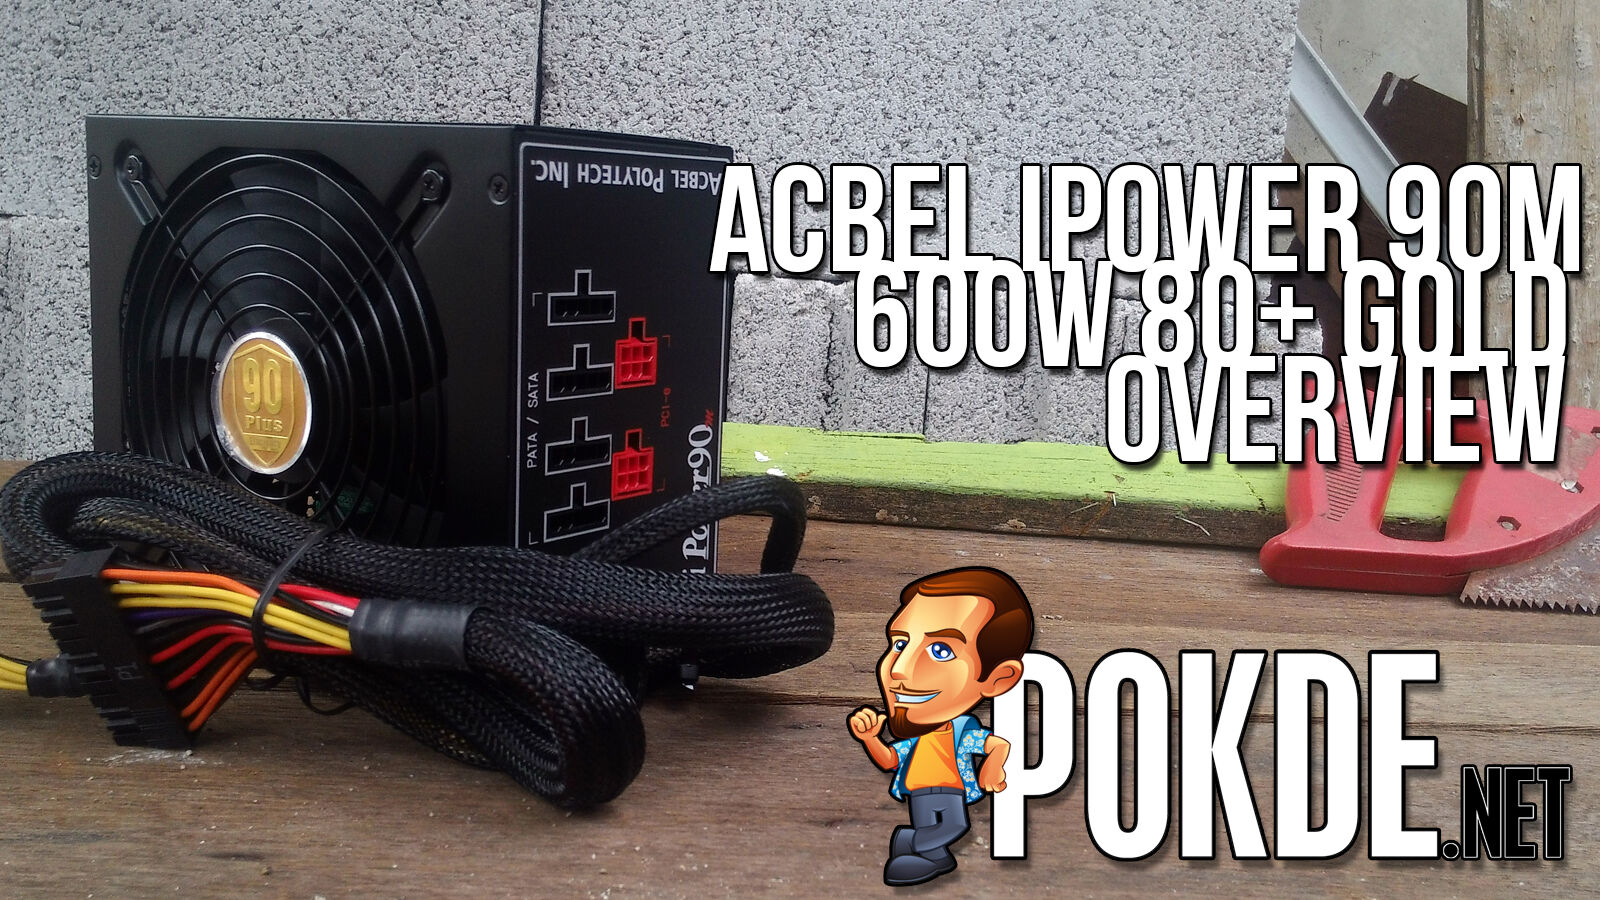 Acbel iPower 90m 600W 80+ Gold overview 23